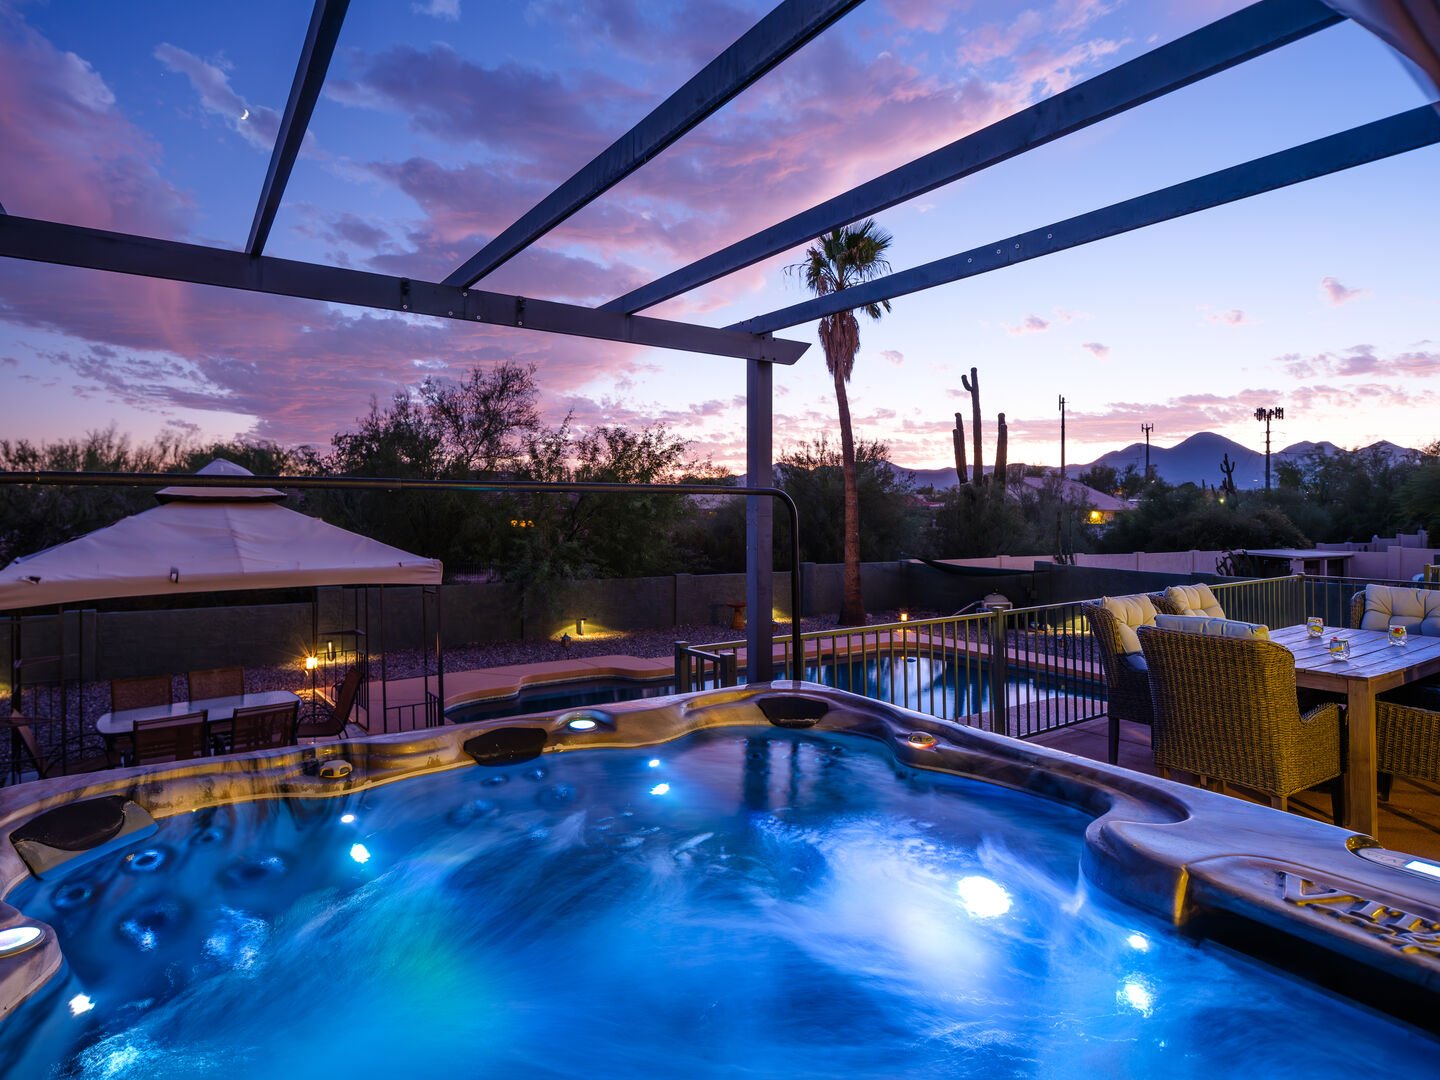 Beautiful valley sunset in the comfort of your own backyard. Relax with some wine on cool evening in the jacuzzi!